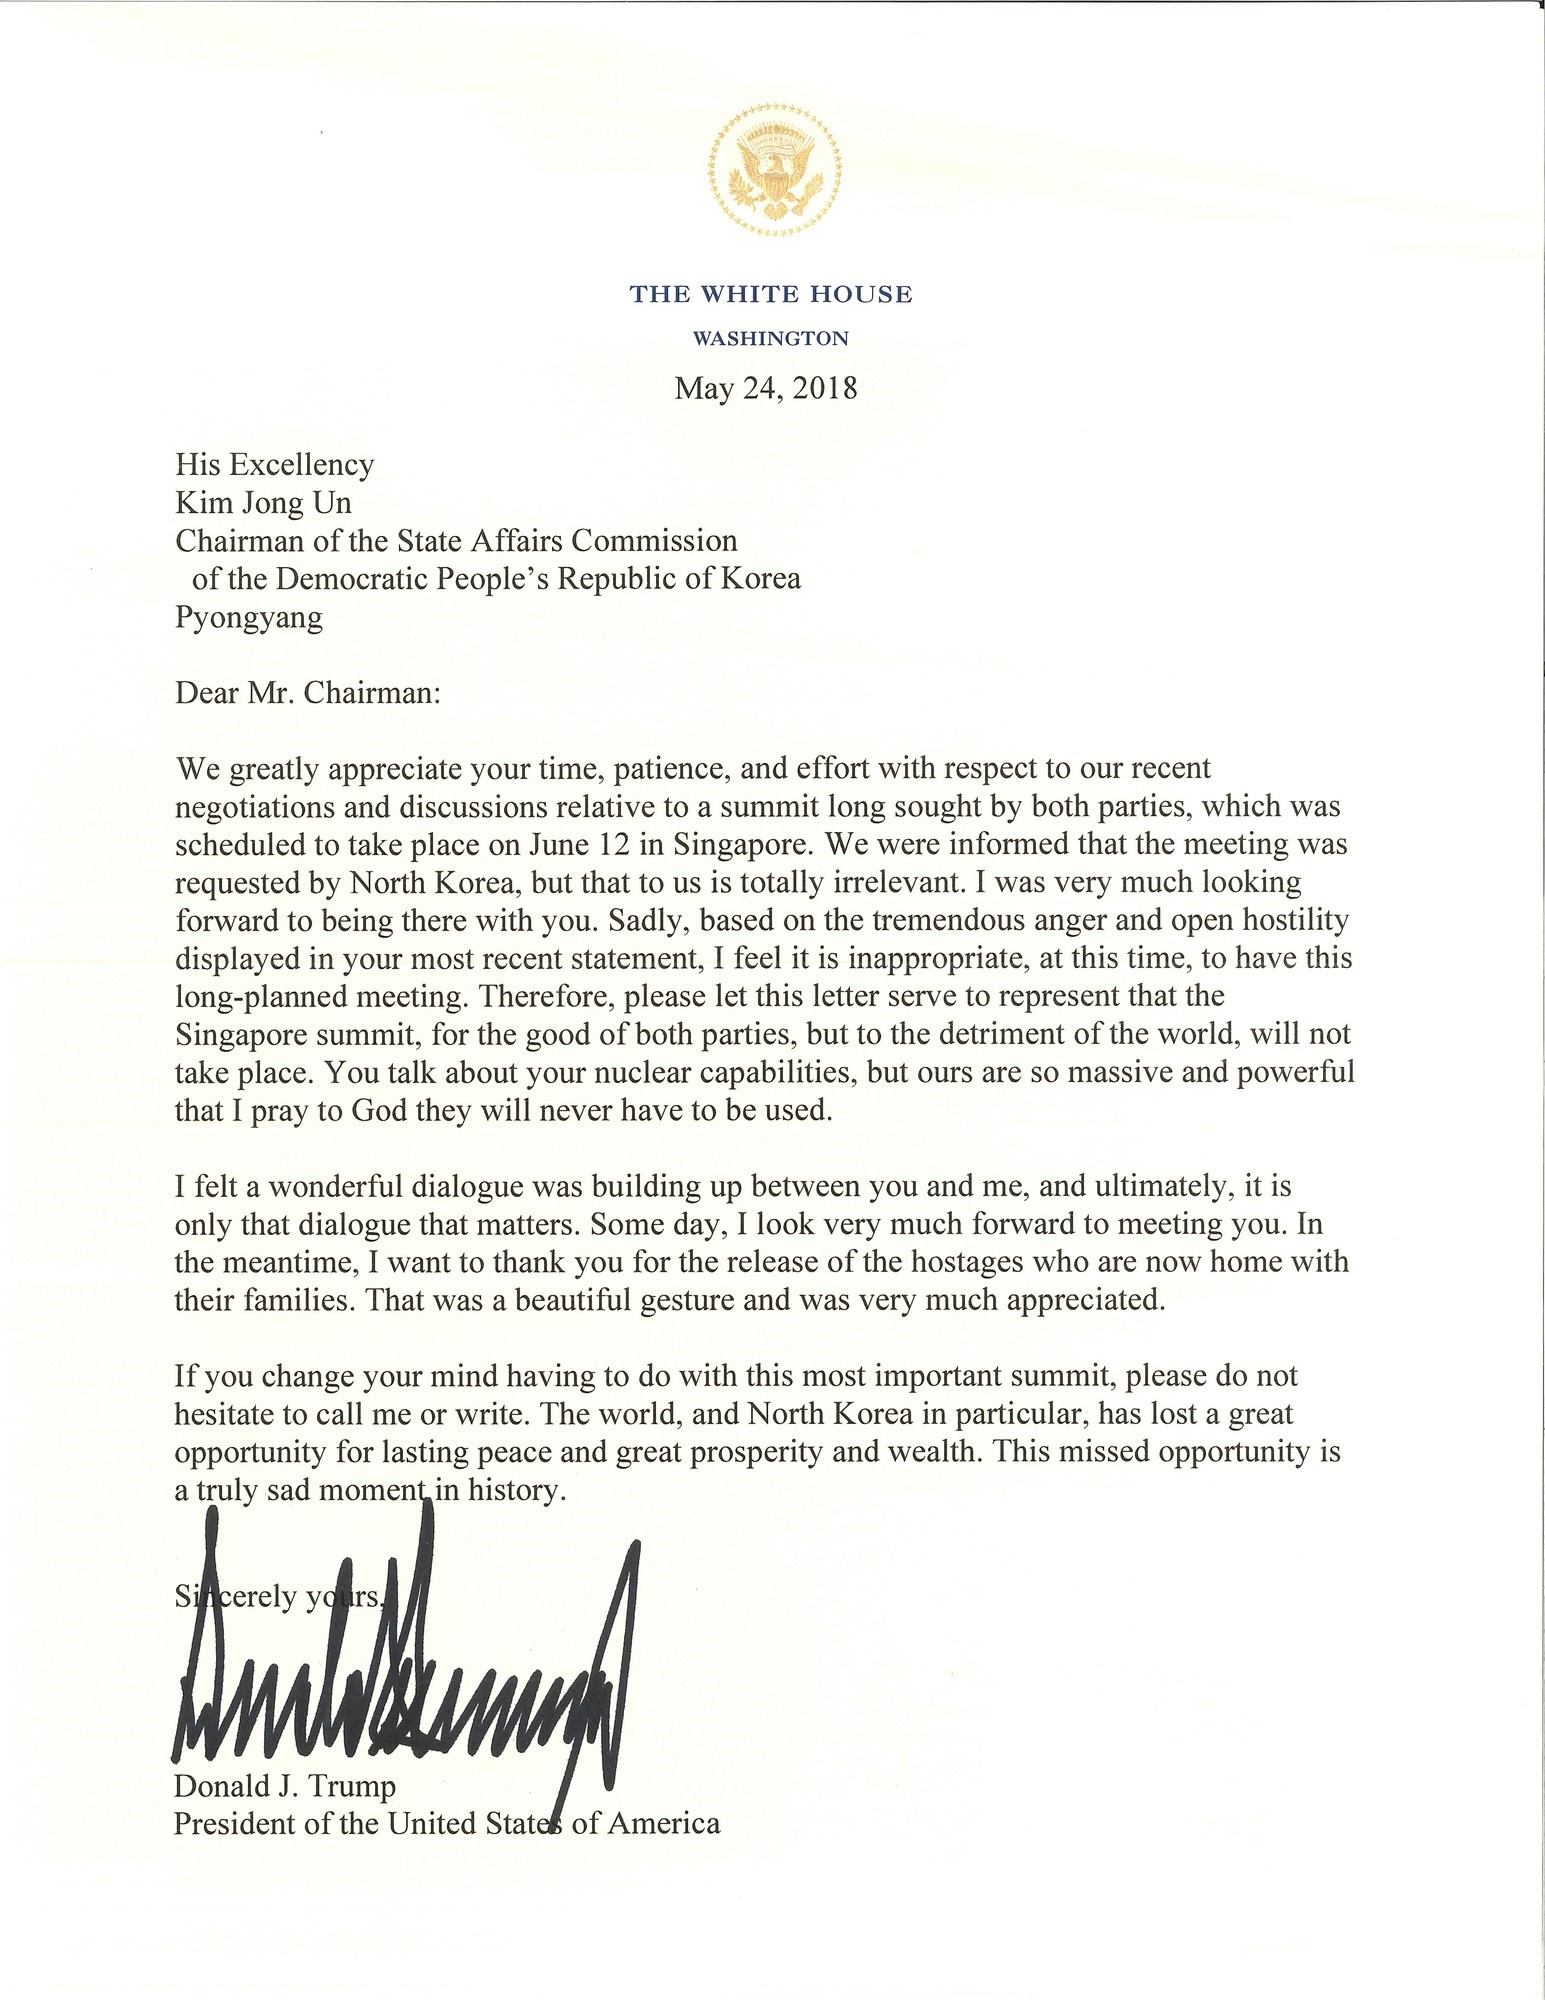 Letter sent to North Korean leader Kim Jong-un by US President Donald Trump informing Kim of the cancellation of the summit